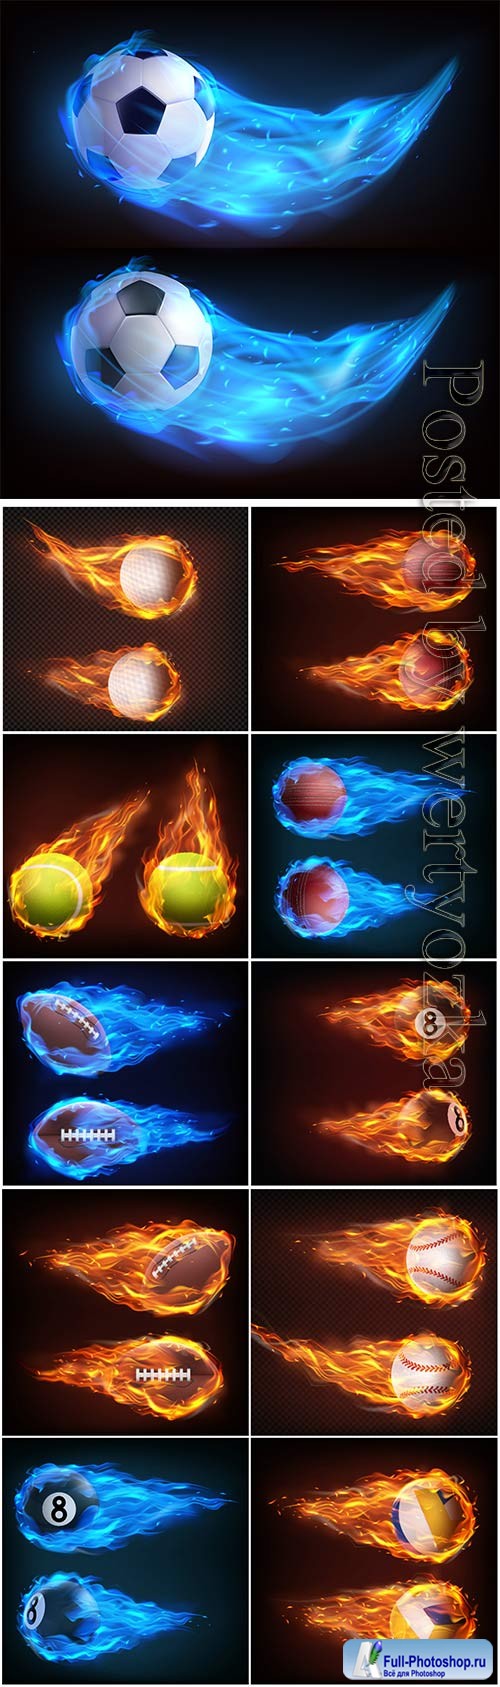 Balls flying in fire realistic vector